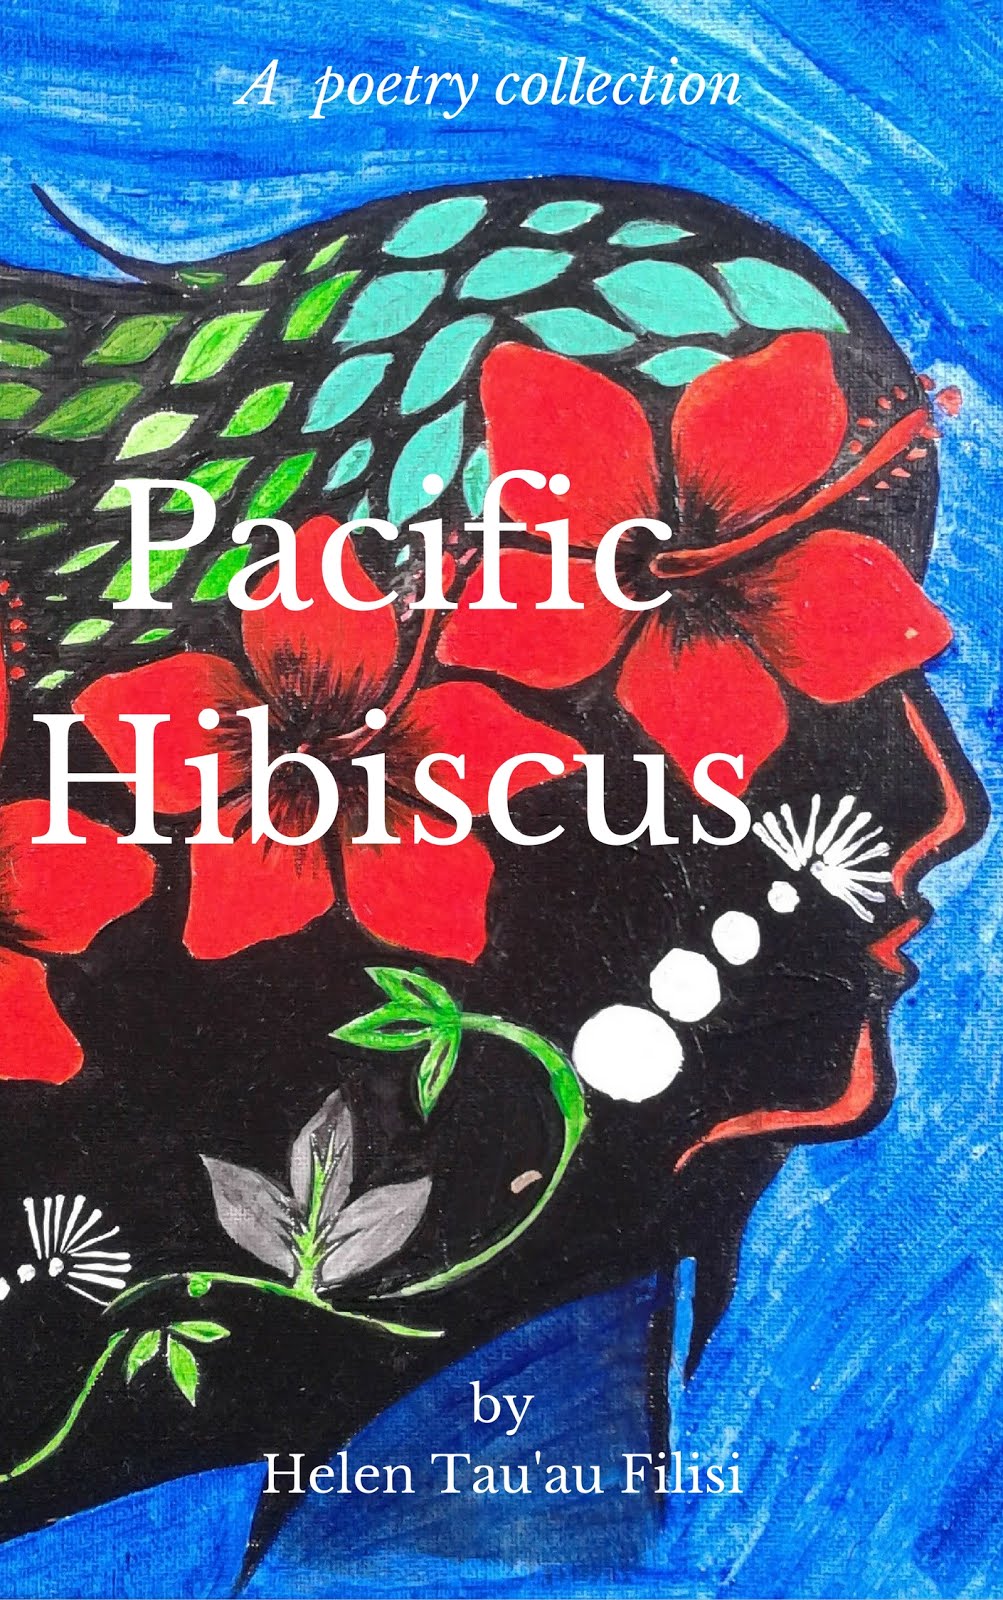 Pacific Hibiscus (1st Poetry collection)